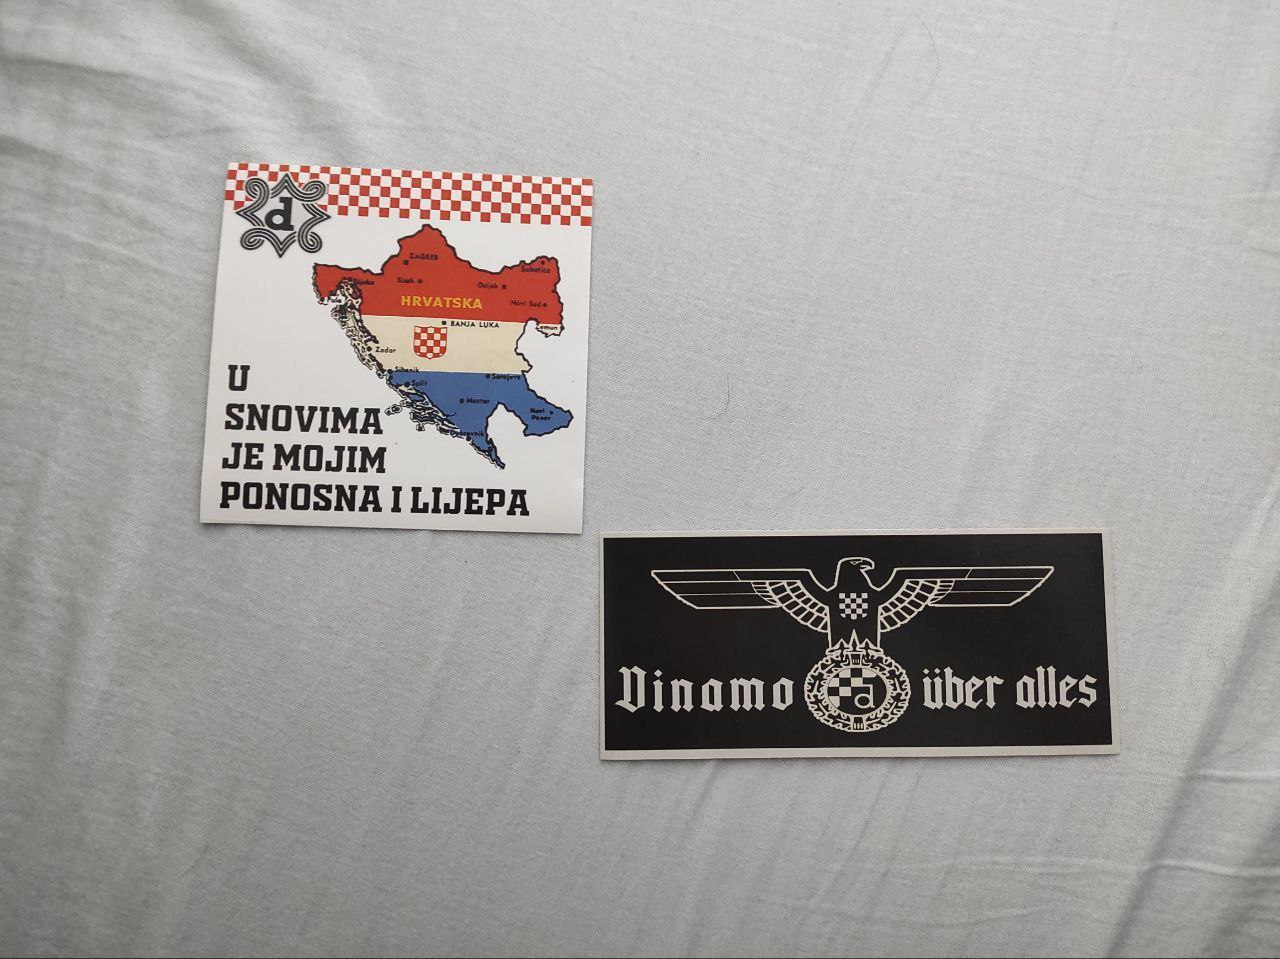 This photo shows two stickers with content related to the fan movement of the Croatian football team Dinamo Zagreb. One shows a map of Croatia in the colours of the Croatian flag. The second has an eagle with open wings, at the base of which is the symbol of Dynamo Zagreb. On the same sticker is the phrase 'Dynamo uber alles'.